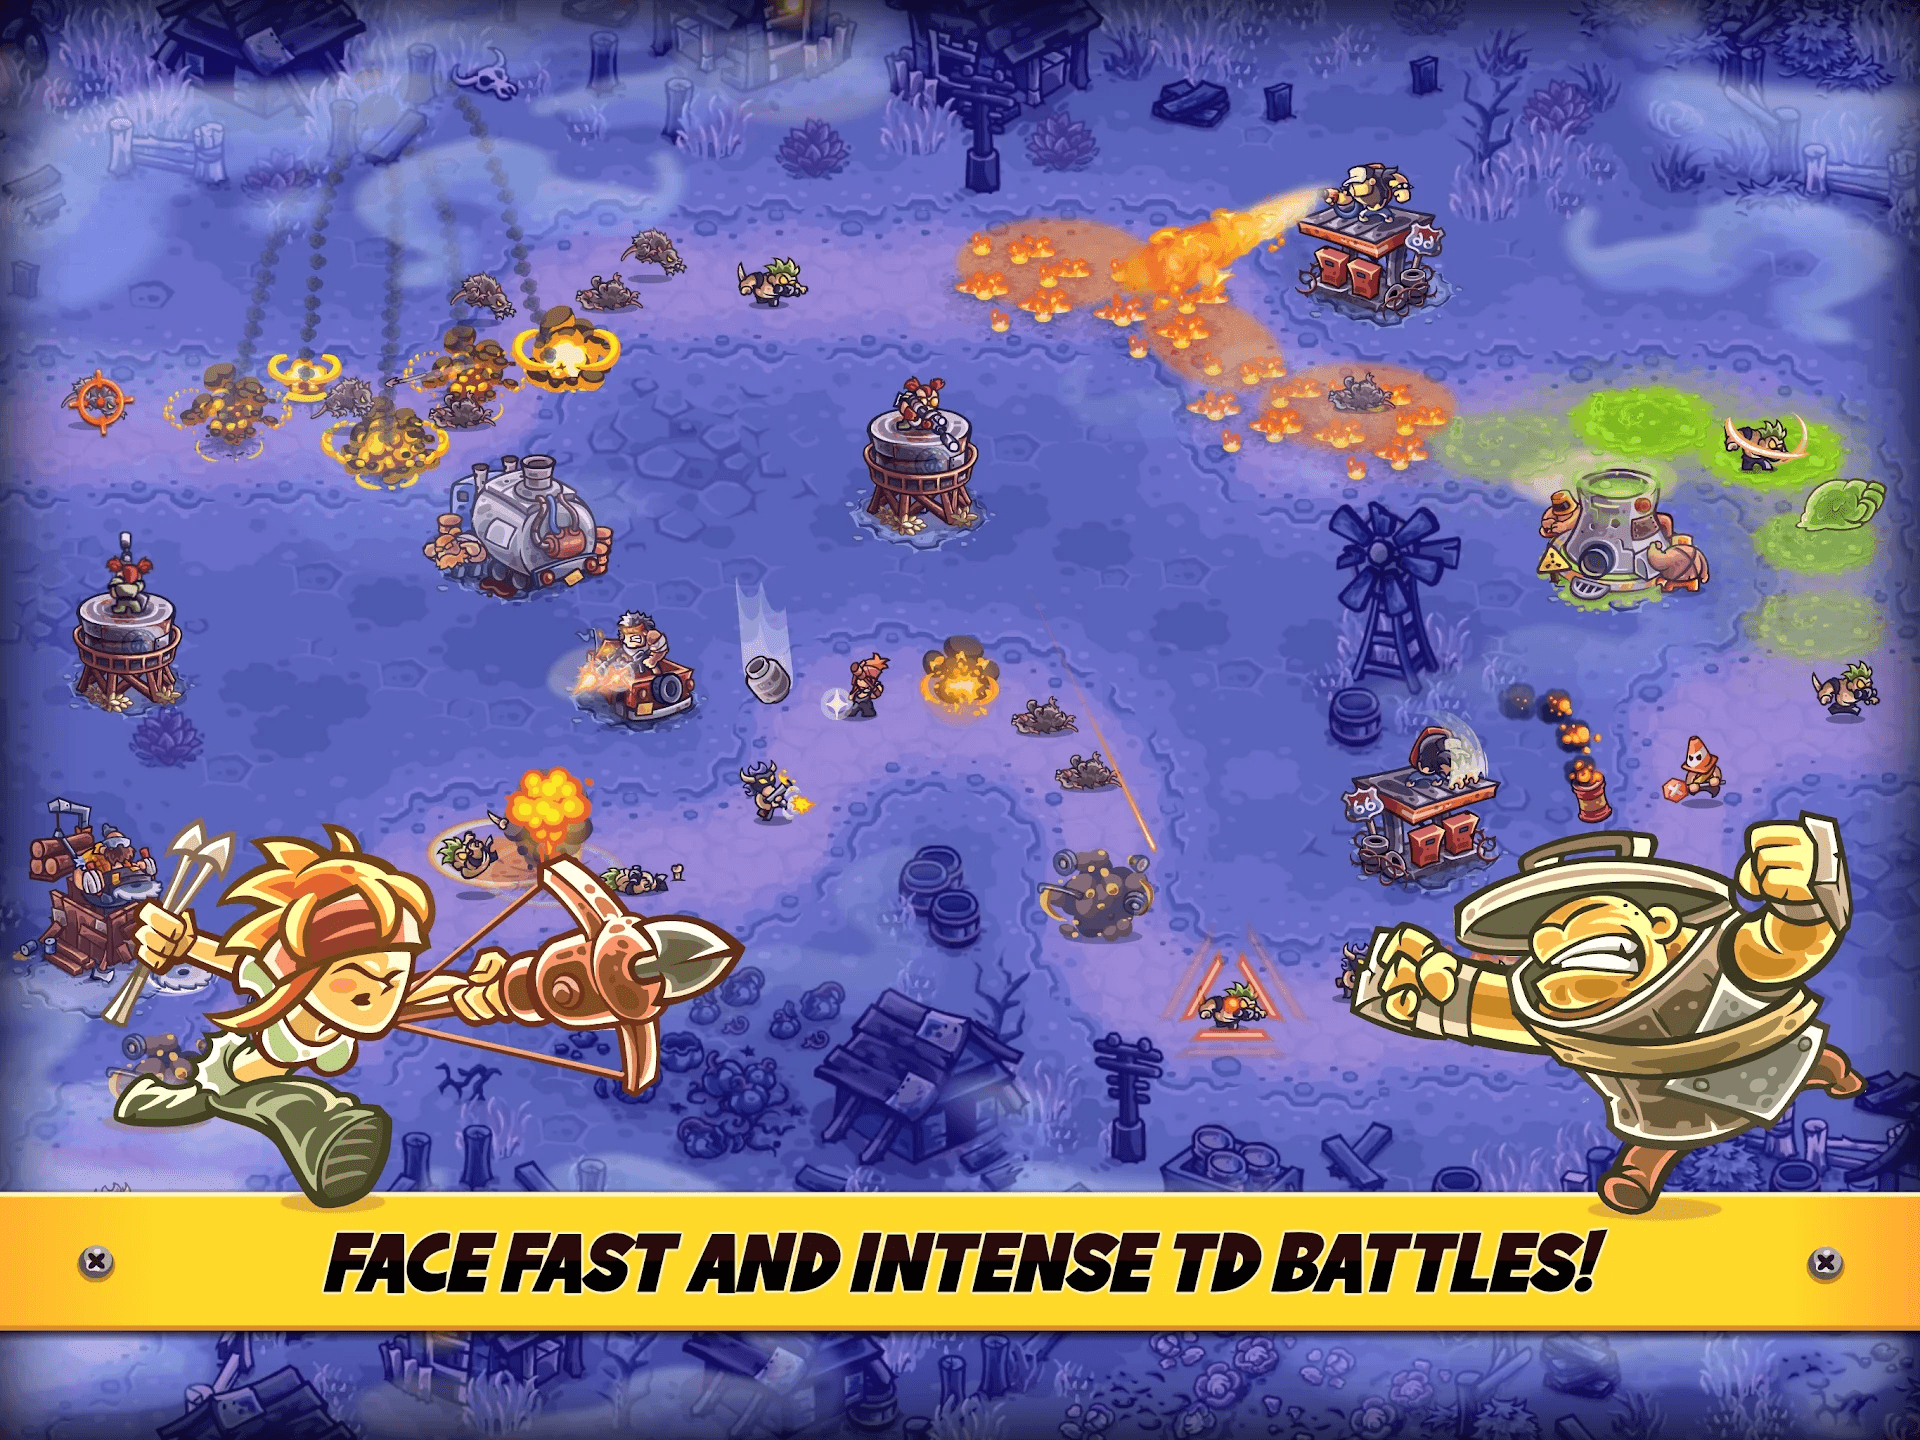 Junkworld – Tower Defense Game Officially Launches